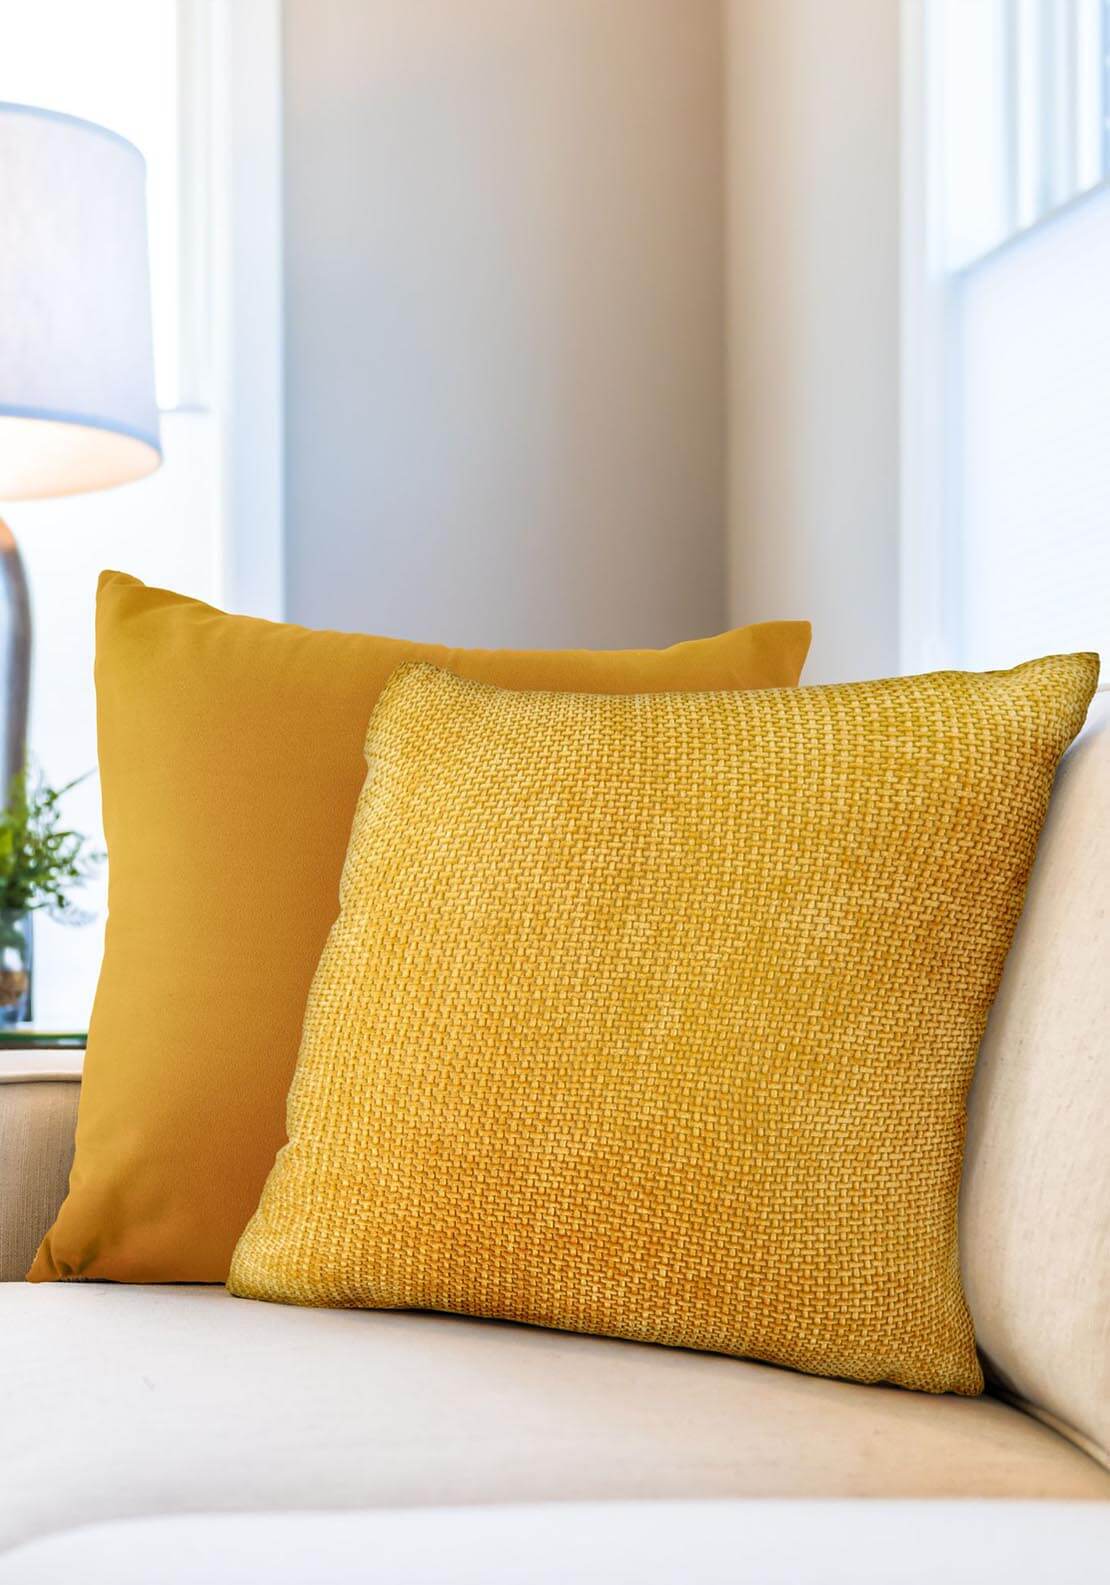 The Home Collection Portland Cushion 17&quot; x 17&quot; - Ochre 1 Shaws Department Stores